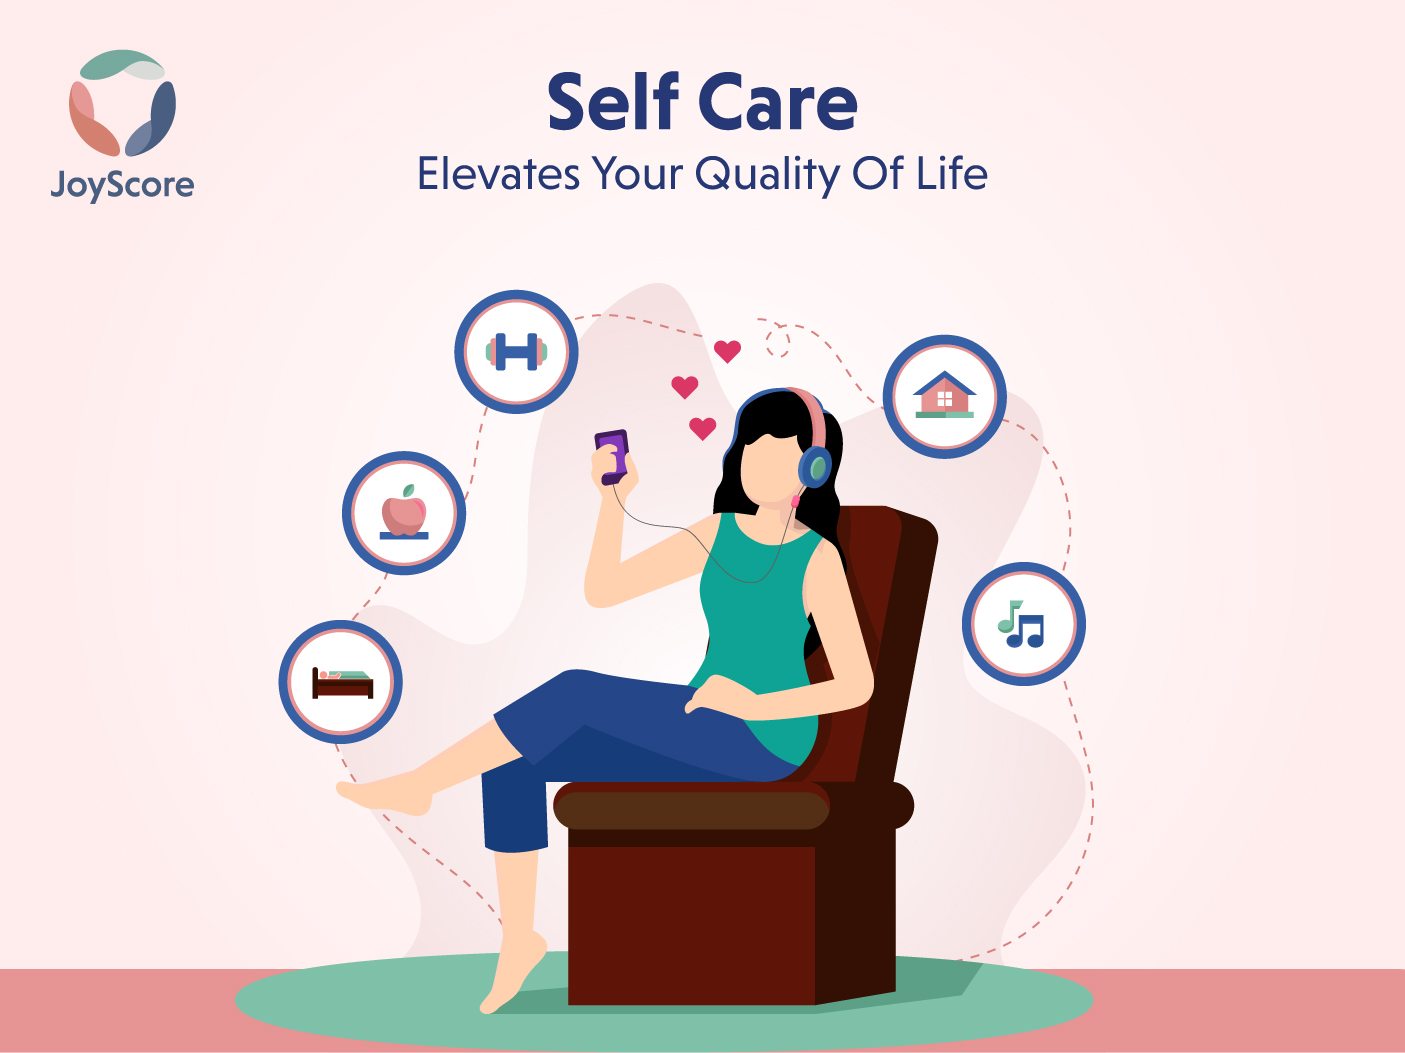 How self-care elevates your quality of life